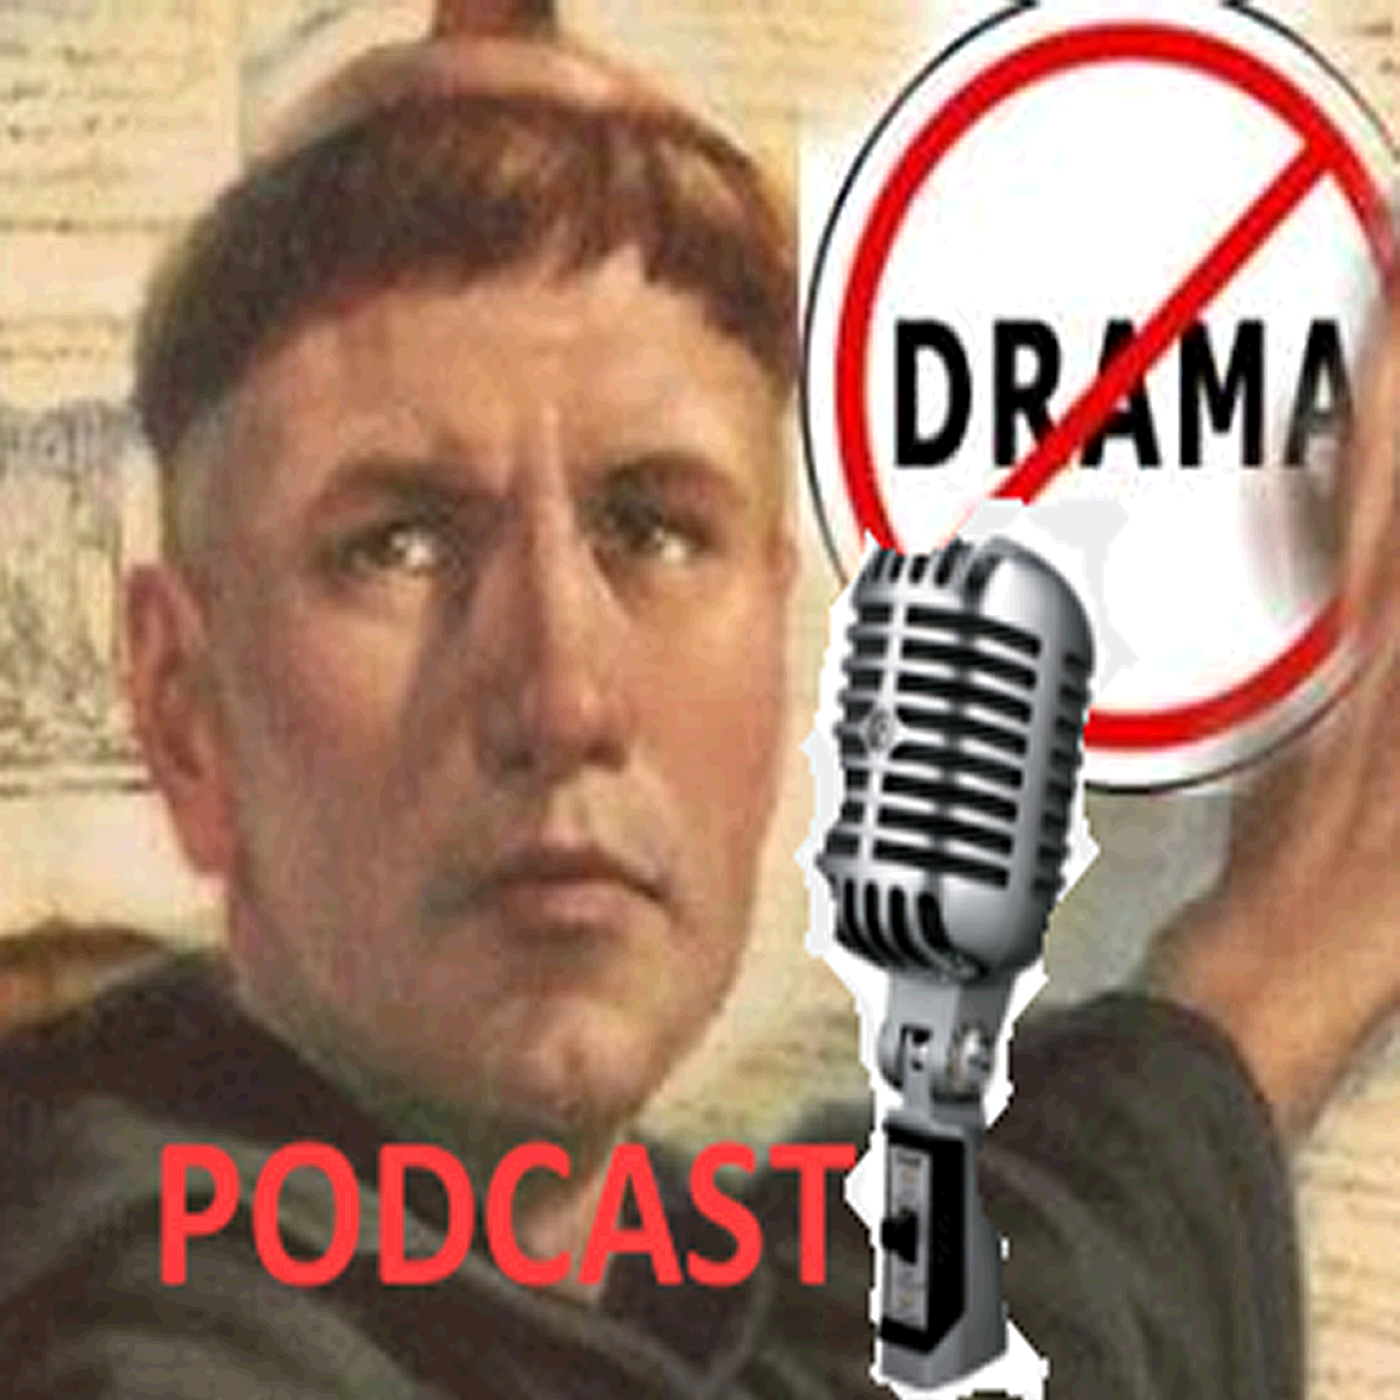 NO DRAMA Podcast - Episode 14: Romans 11:11-24 GRAFTED!